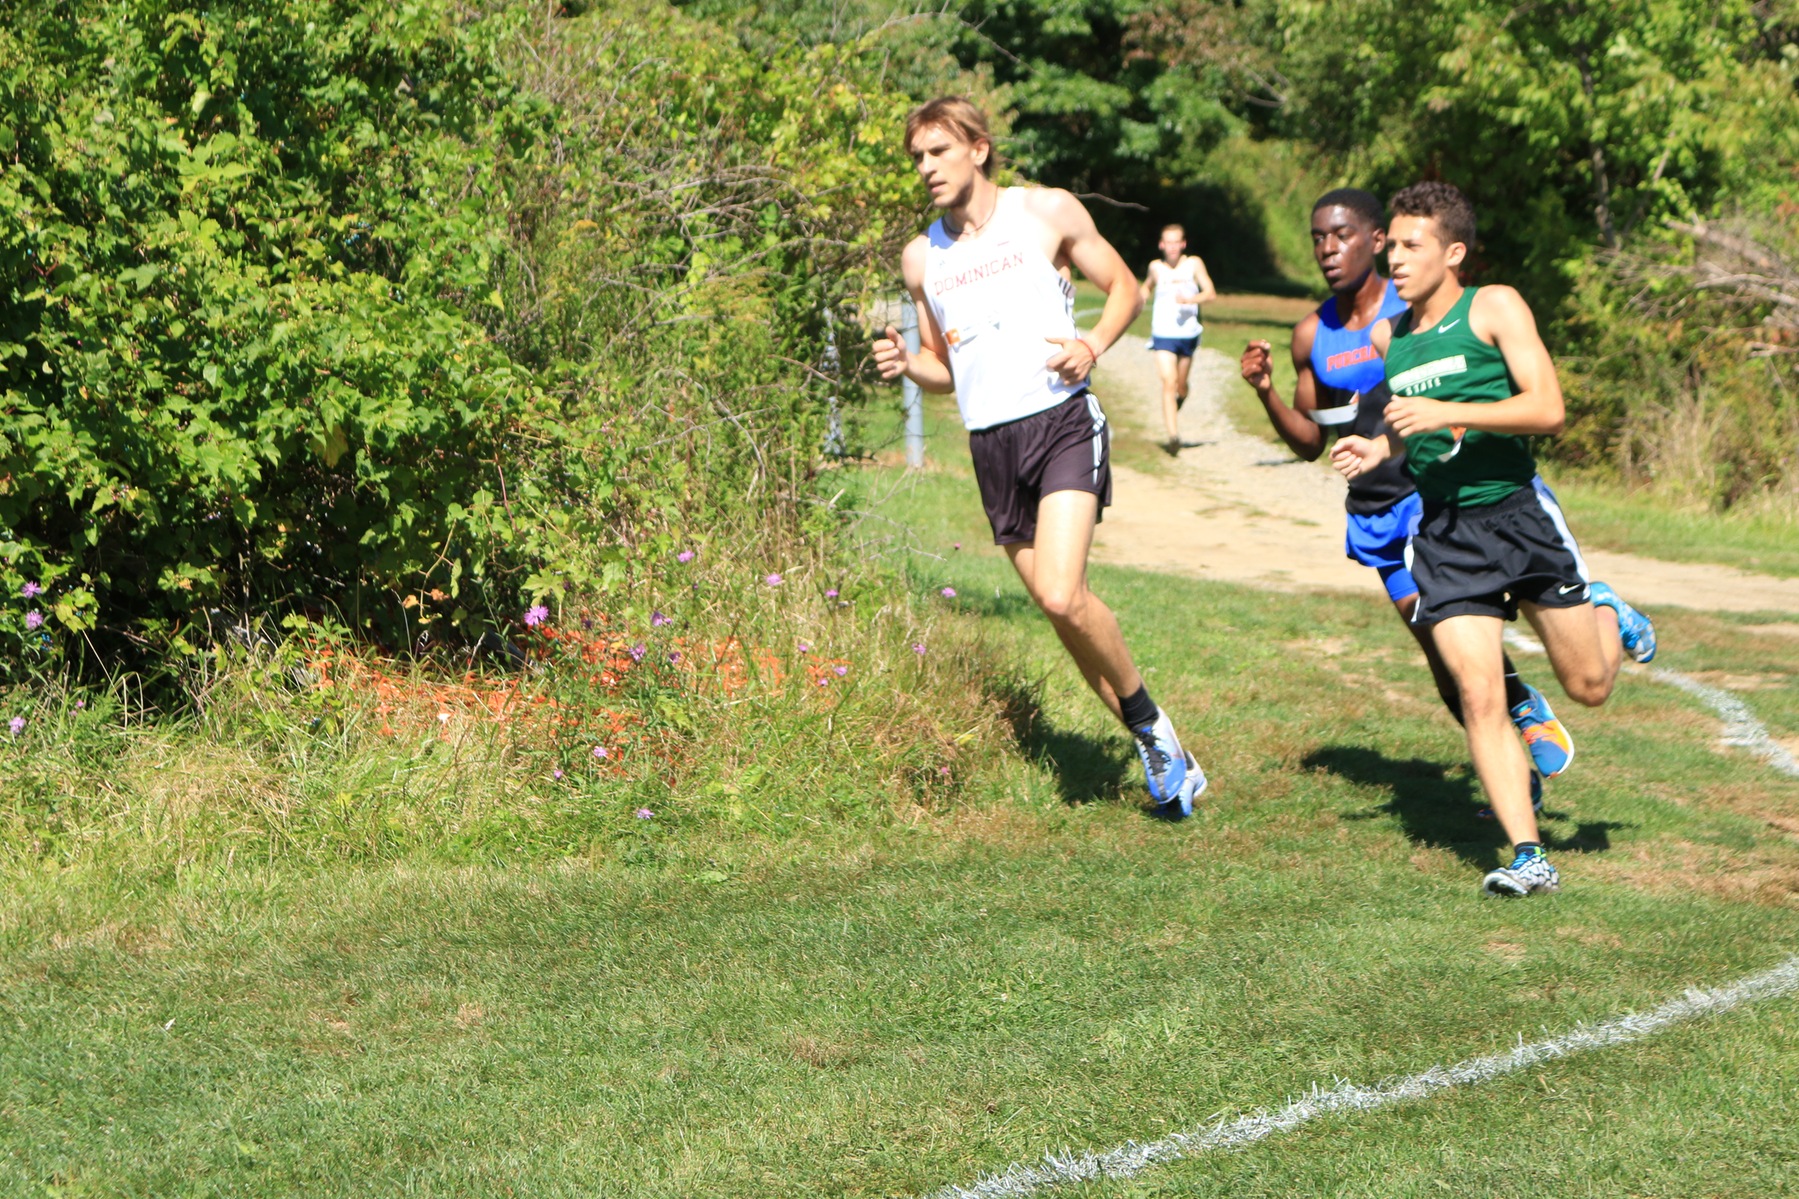 MEN'S CROSS COUNTRY TAKE SIXTH PLACE AT MOUNT SAINT MARY COLLEGE CROSS COUNTRY INVITATIONAL